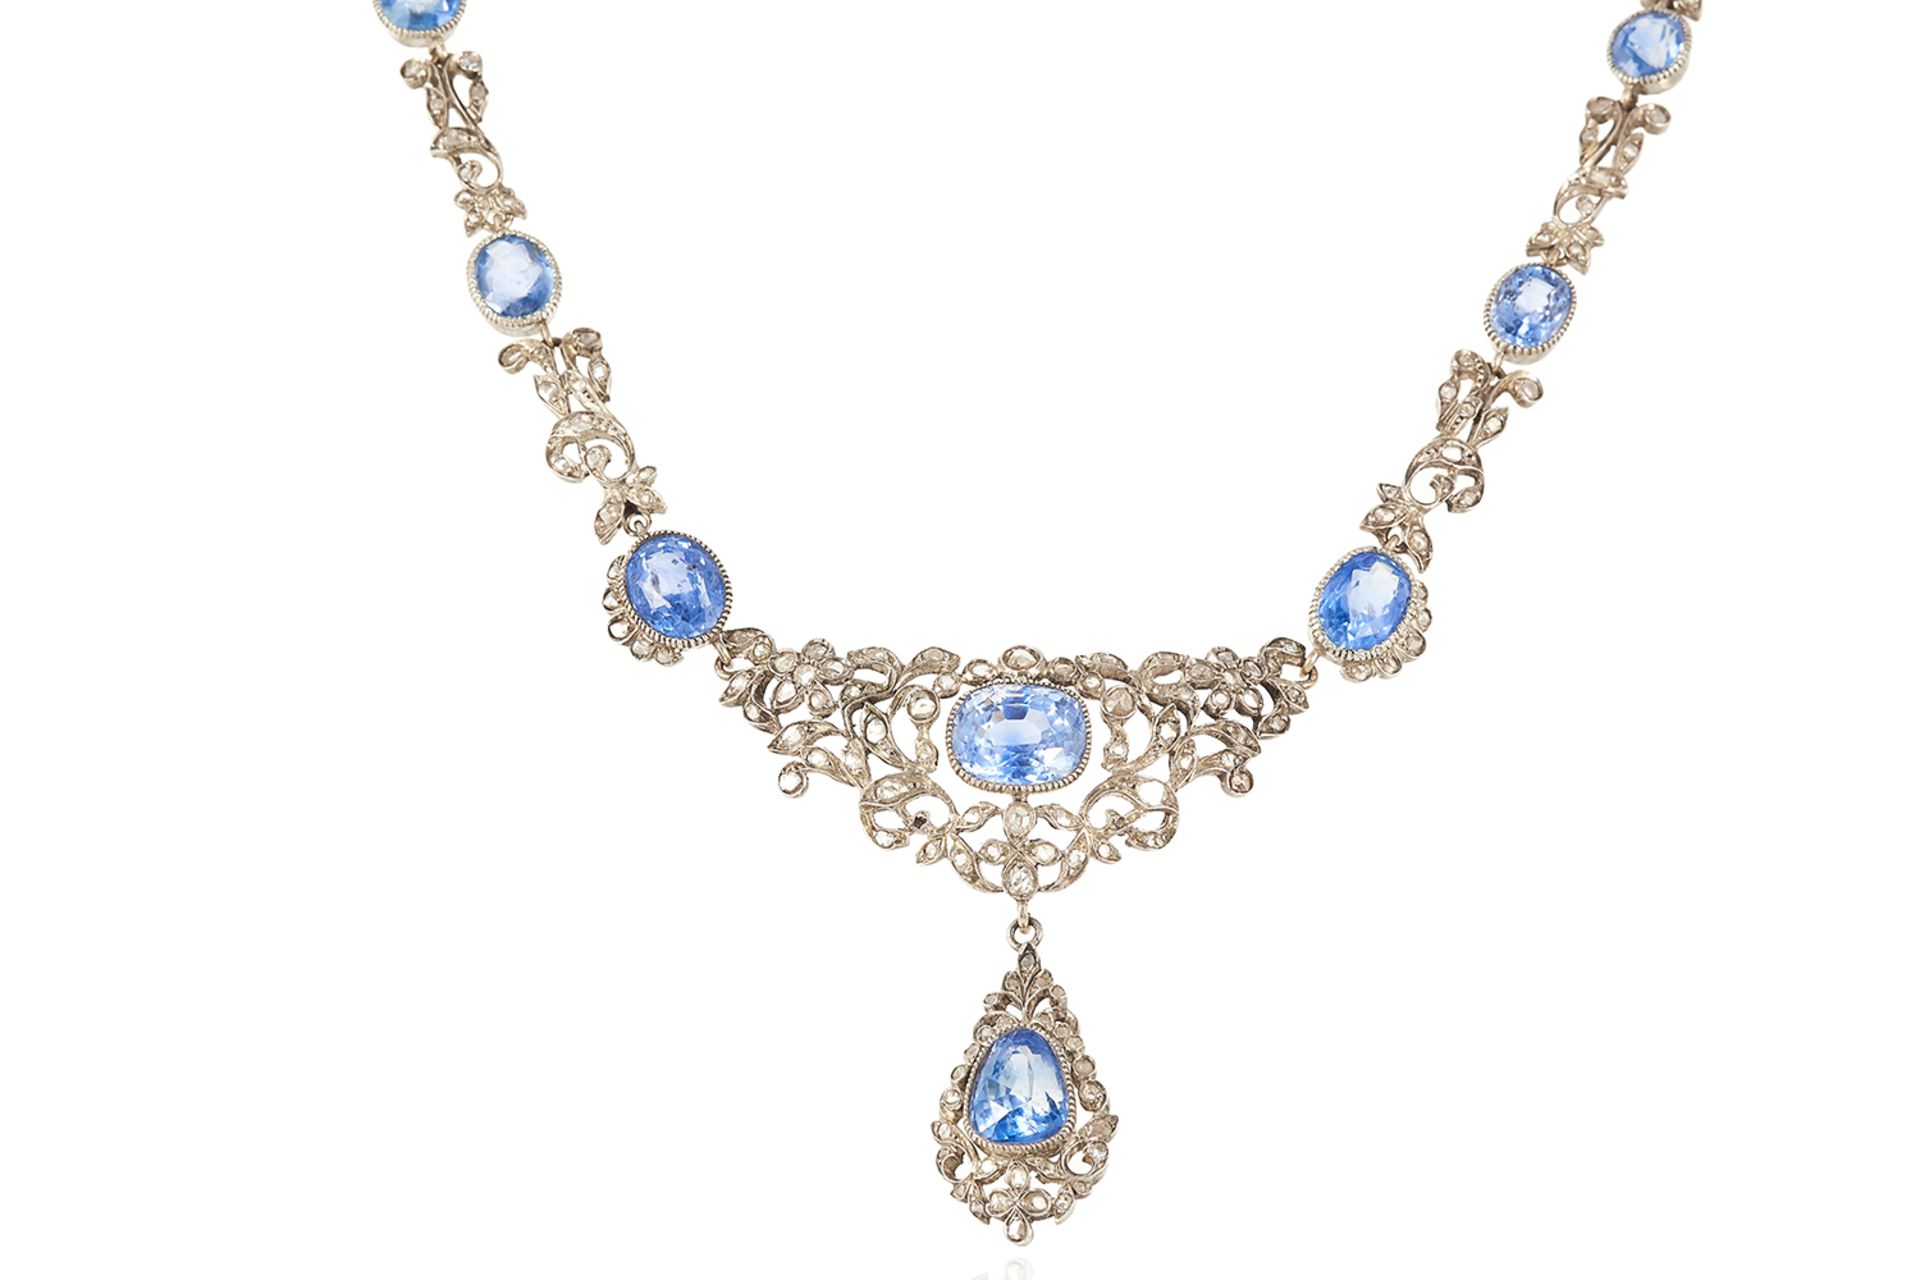 AN ANTIQUE CEYLON NO HEAT SAPPHIRE AND DIAMOND NECKLACE in yellow gold and platinum, the necklace